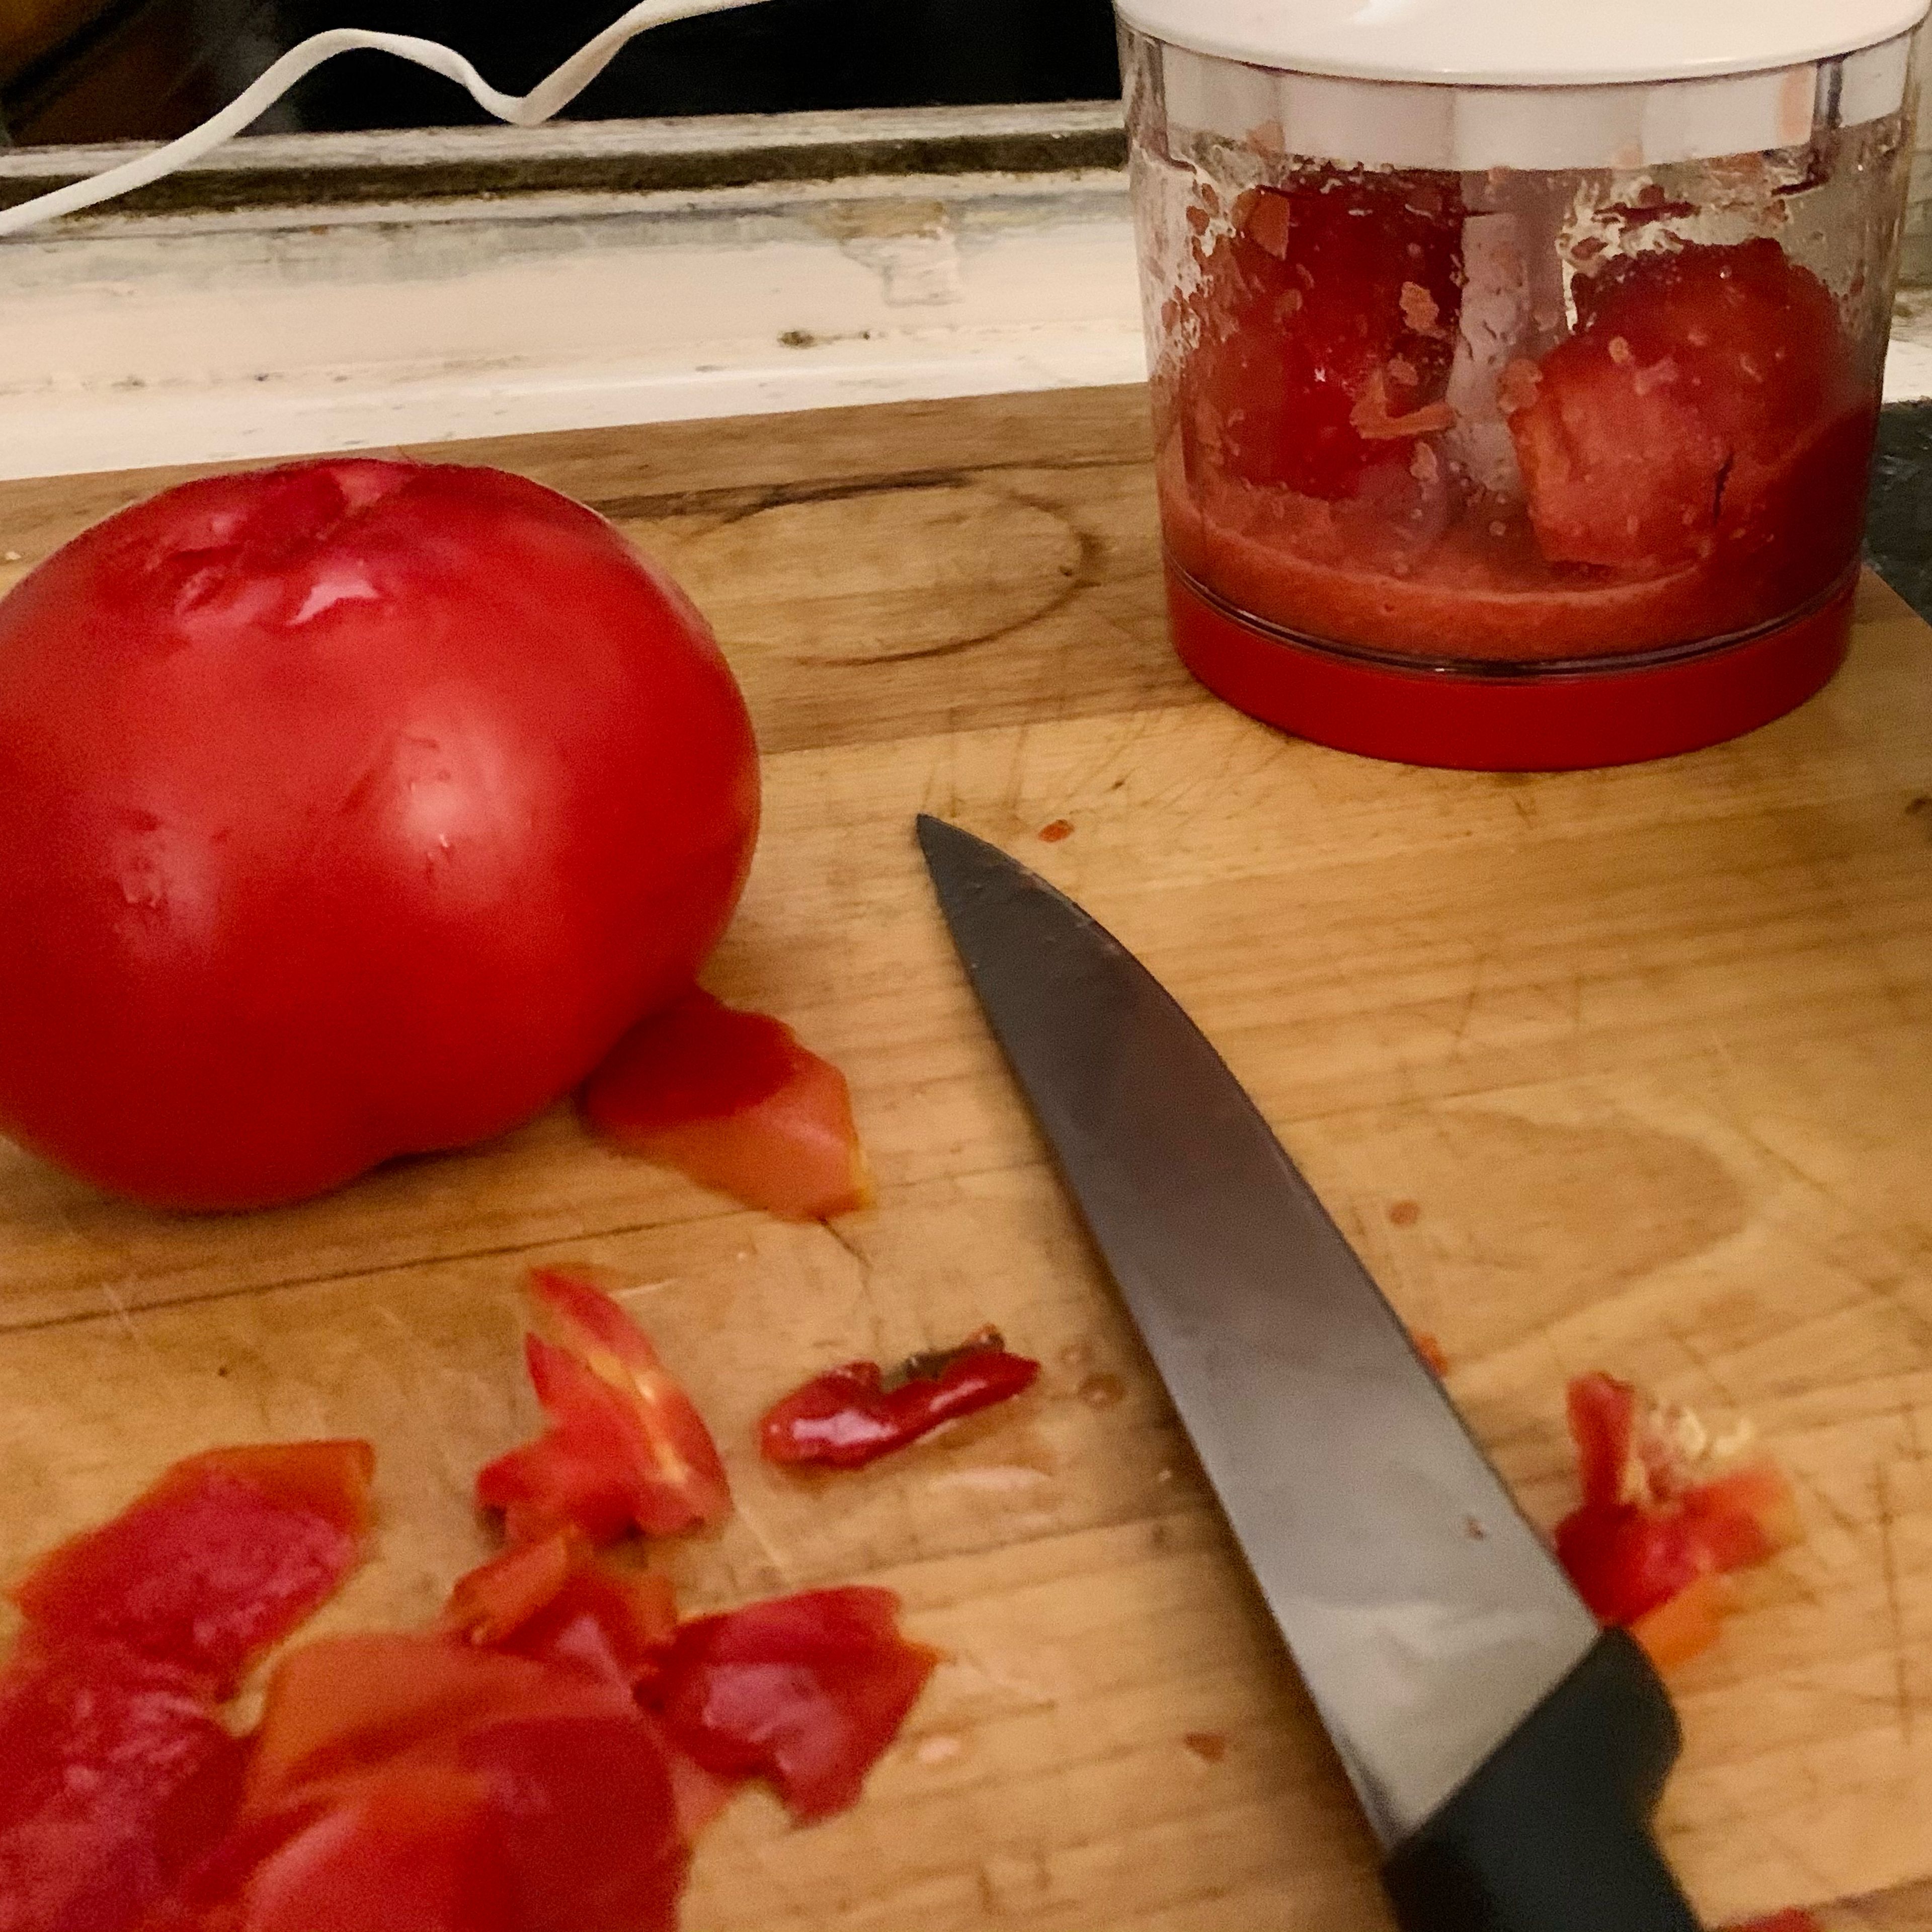 I like to blend the whole tomato separately to avoid loosing the water inside of it, but just cutting them is also ok.